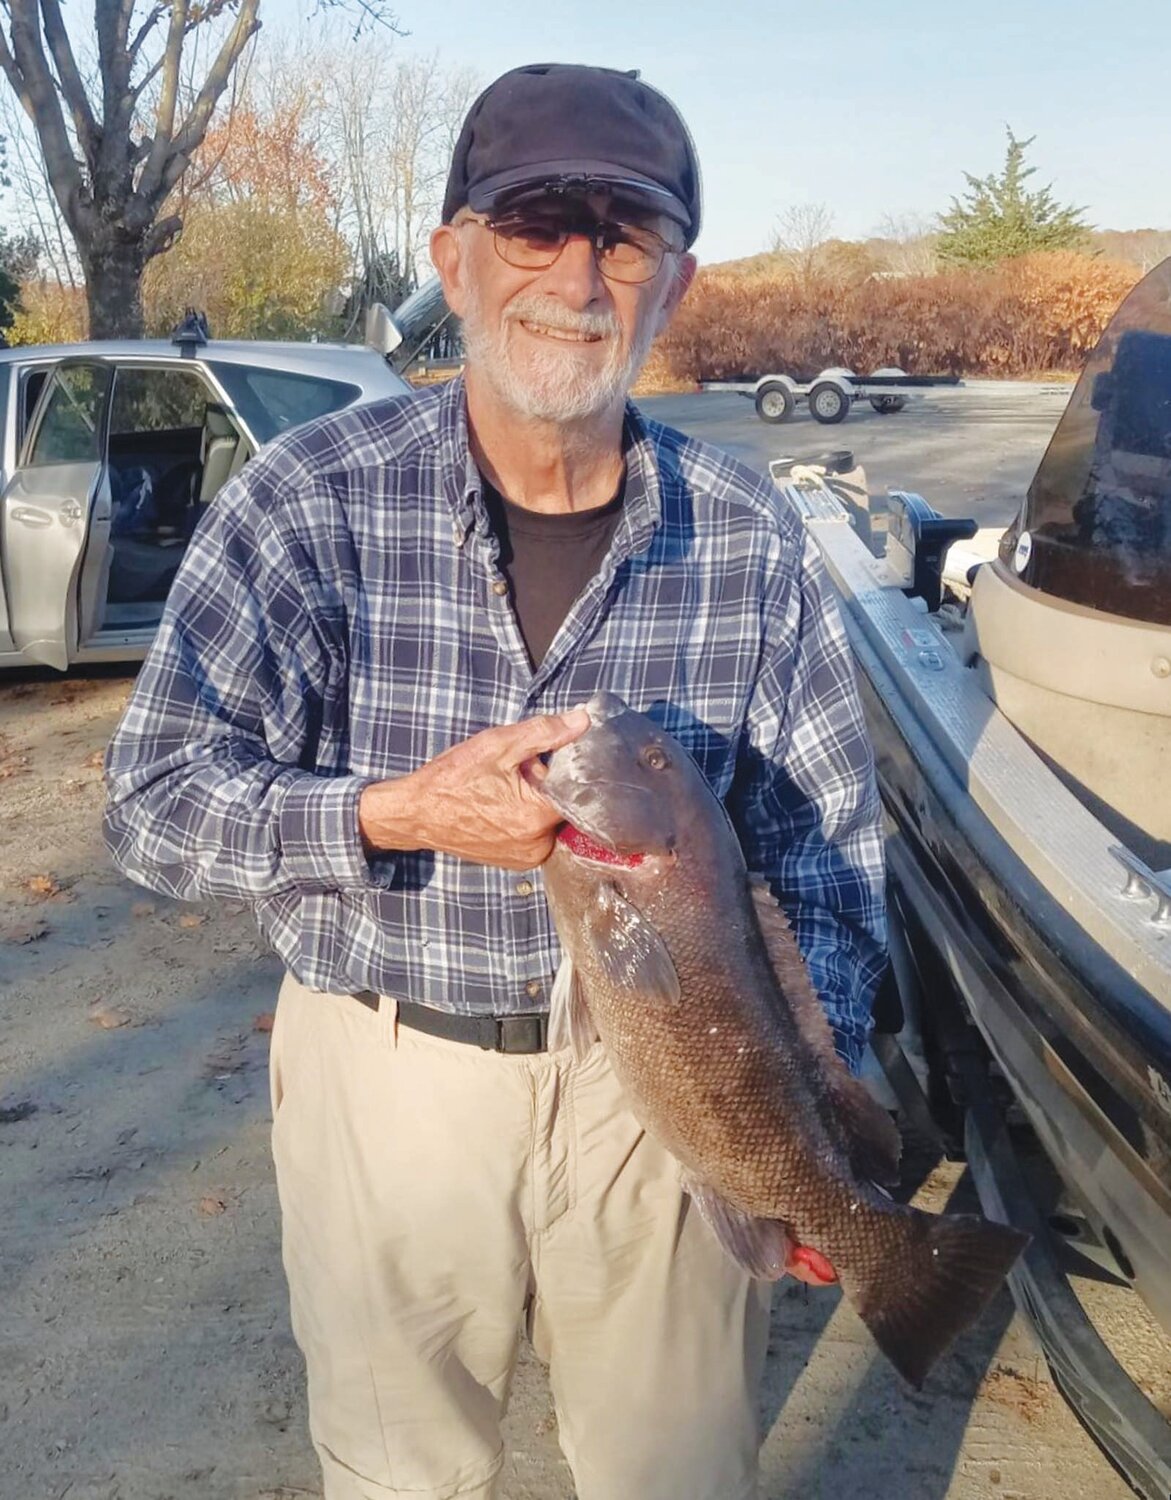 TAUTOG BITE: Walt Galloway with tautog. He and his fishing partner Walter Berry caught tautog to 21 inches earlier this week in the General Rock, North Kingstown area. (Submitted photo)